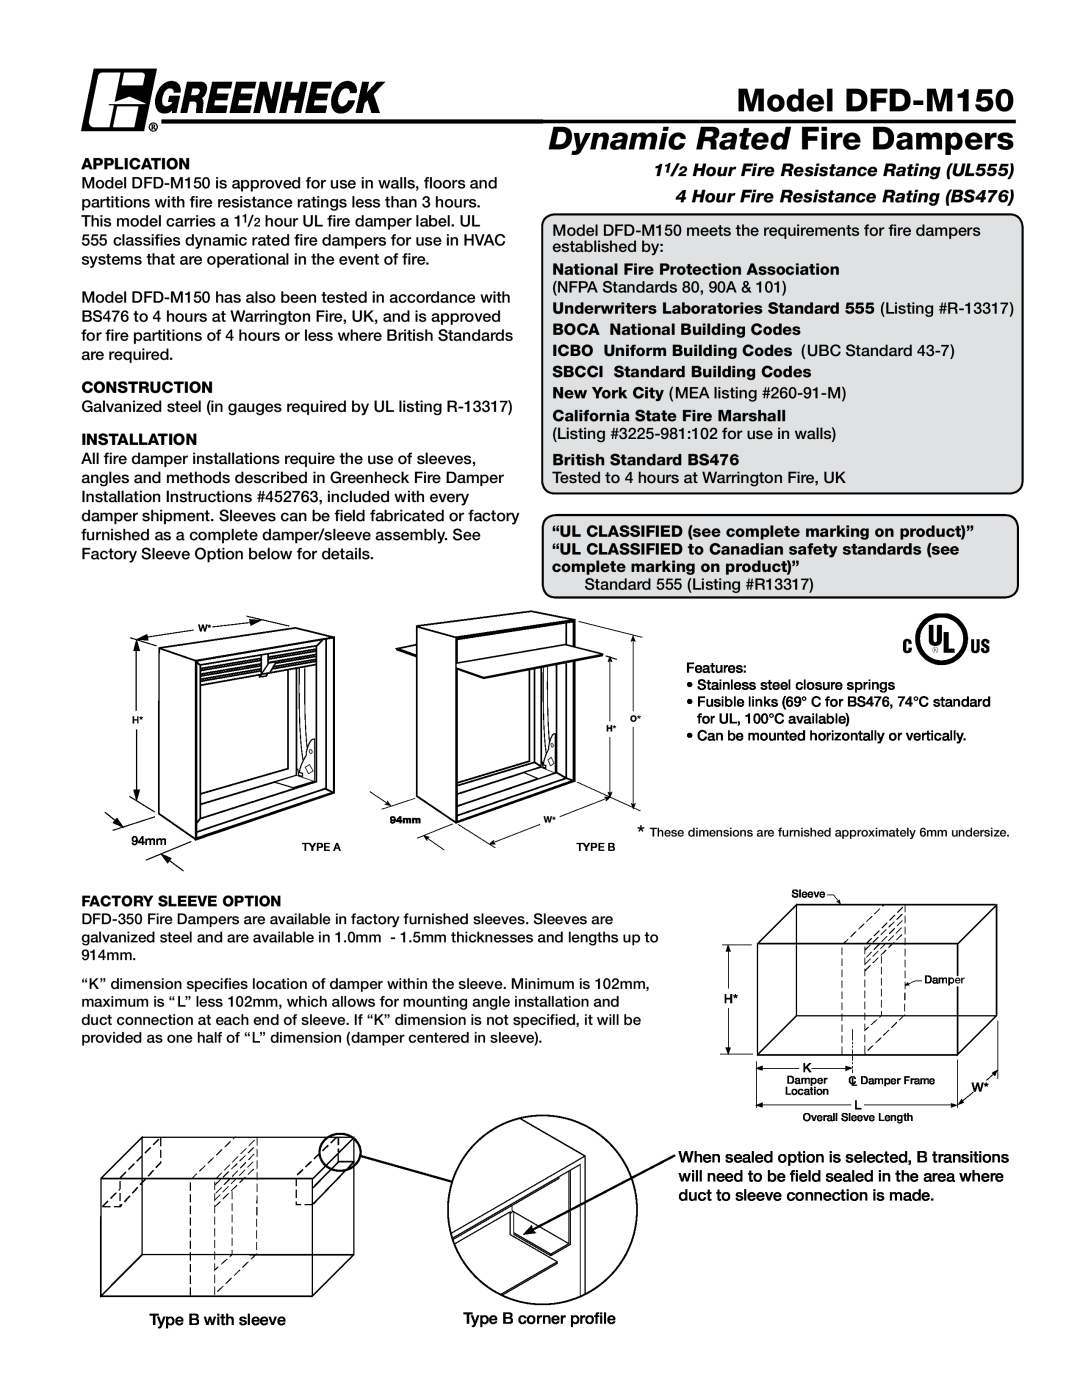 Greenheck Fan installation instructions Model DFD-M150, Dynamic Rated Fire Dampers, Hour Fire Resistance Rating BS476 